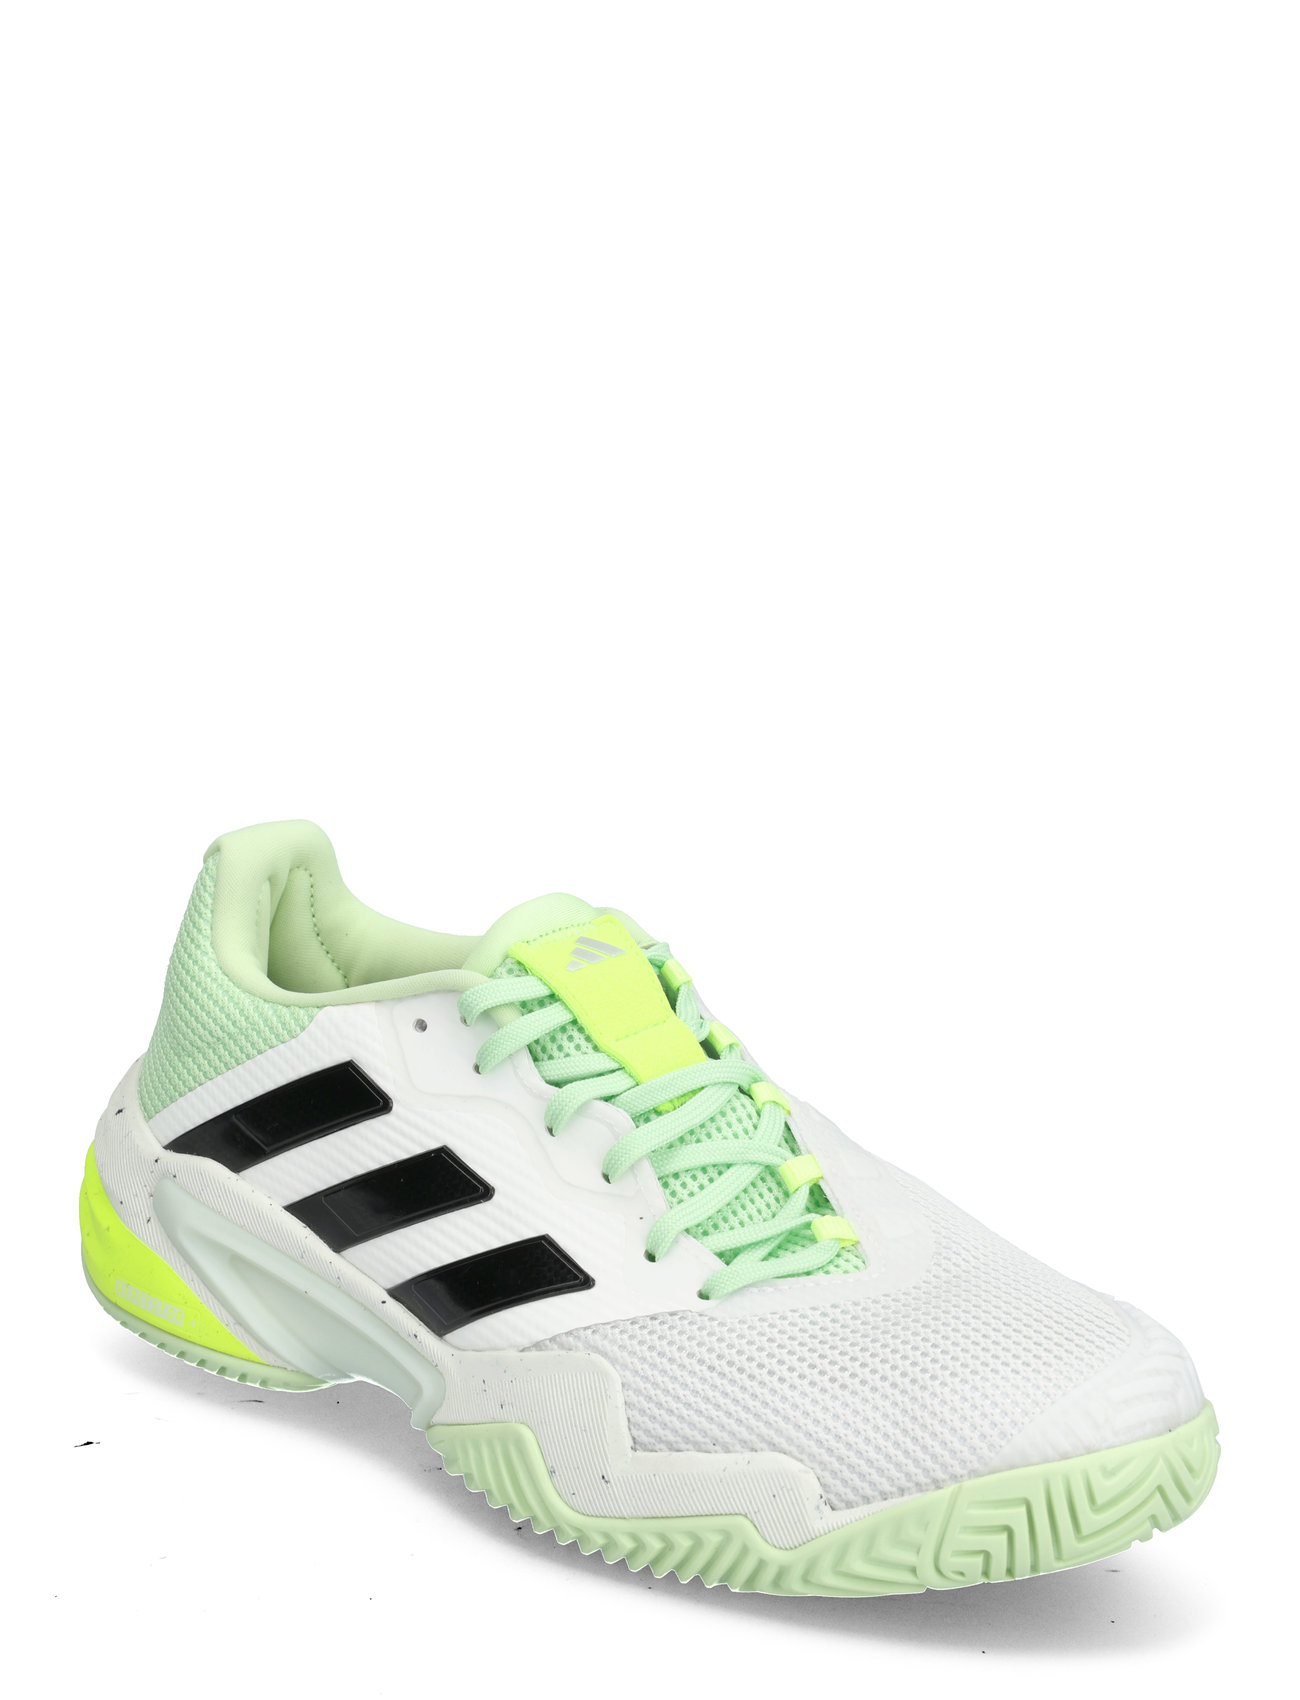 Barricade 13 M Sport Sport Shoes Racketsports Shoes Tennis Shoes White Adidas Performance